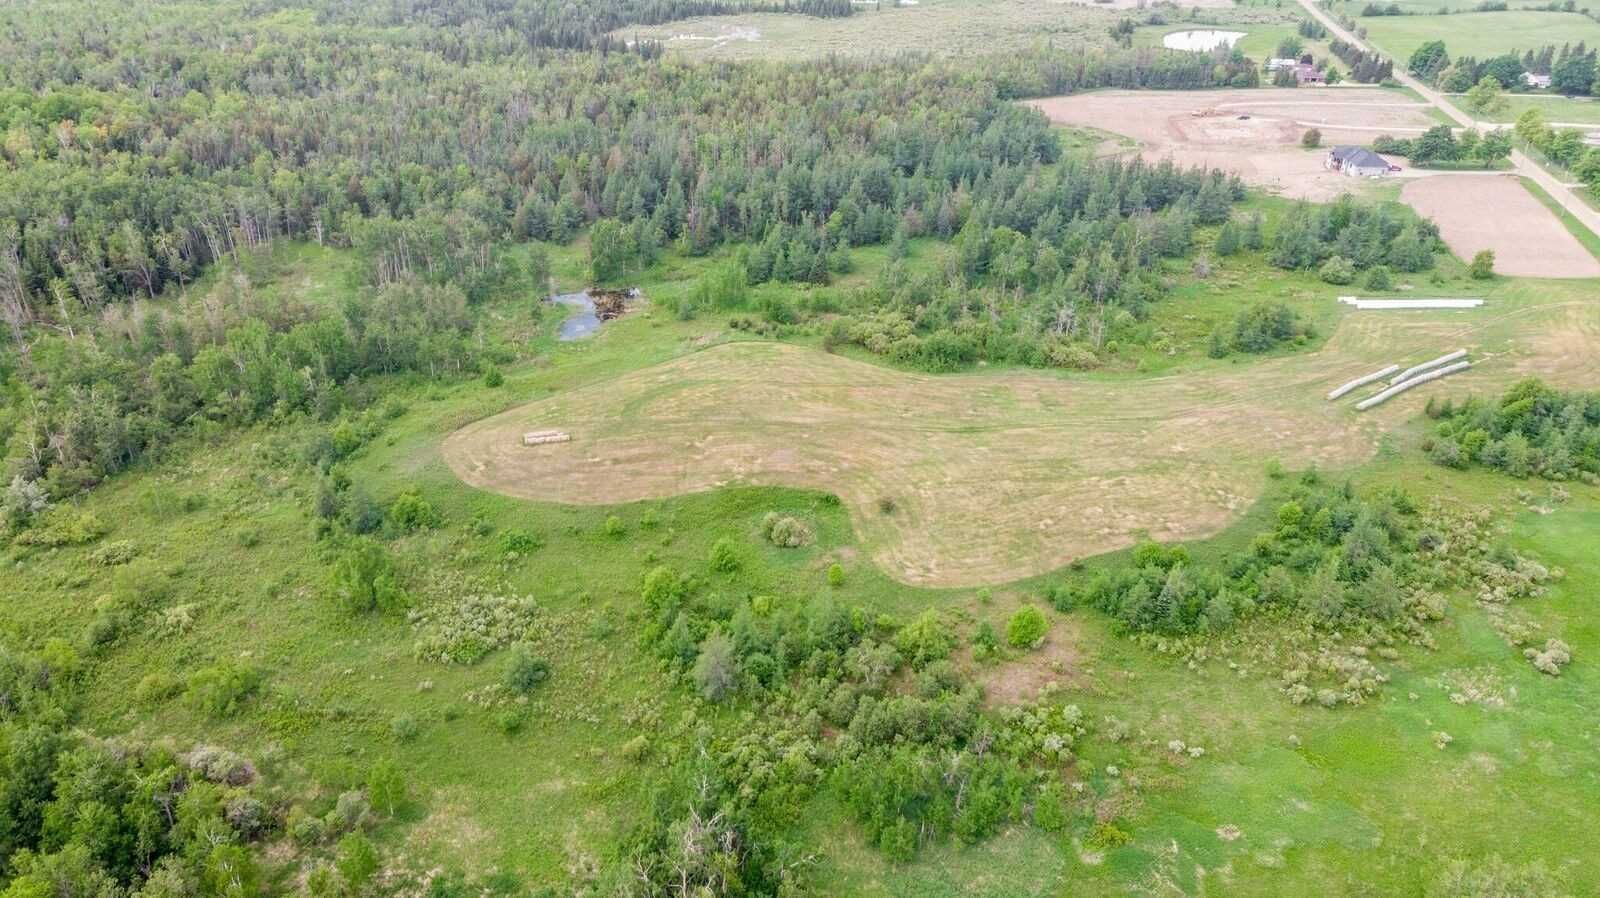 Main Photo: Lot 17 Con 2 in Amaranth: Rural Amaranth Property for sale : MLS®# X4680333